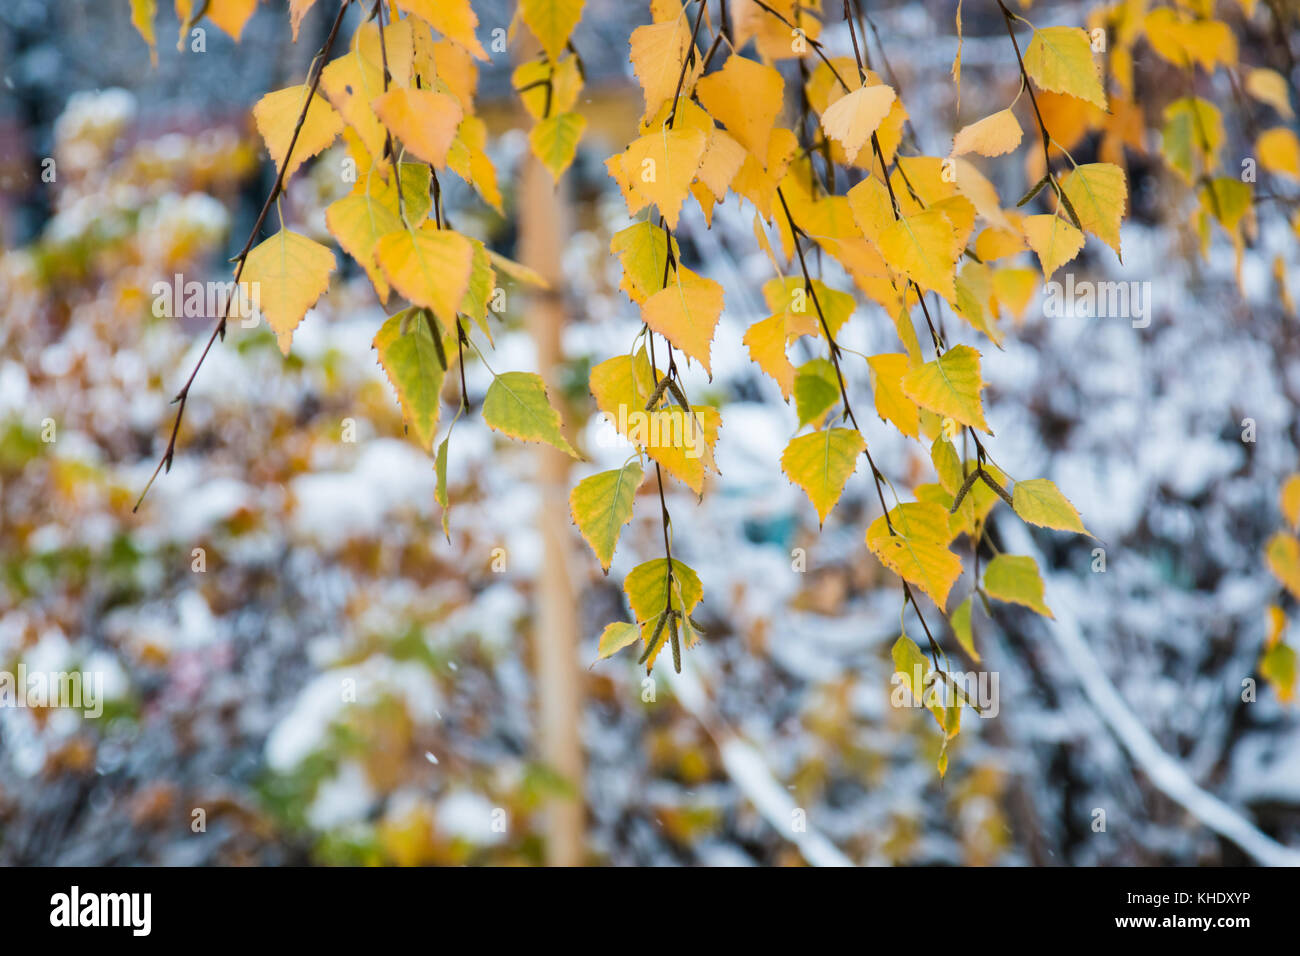 Branch with yellow autumn leaves of a birch on a blurred background of the first snow. Stock Photo